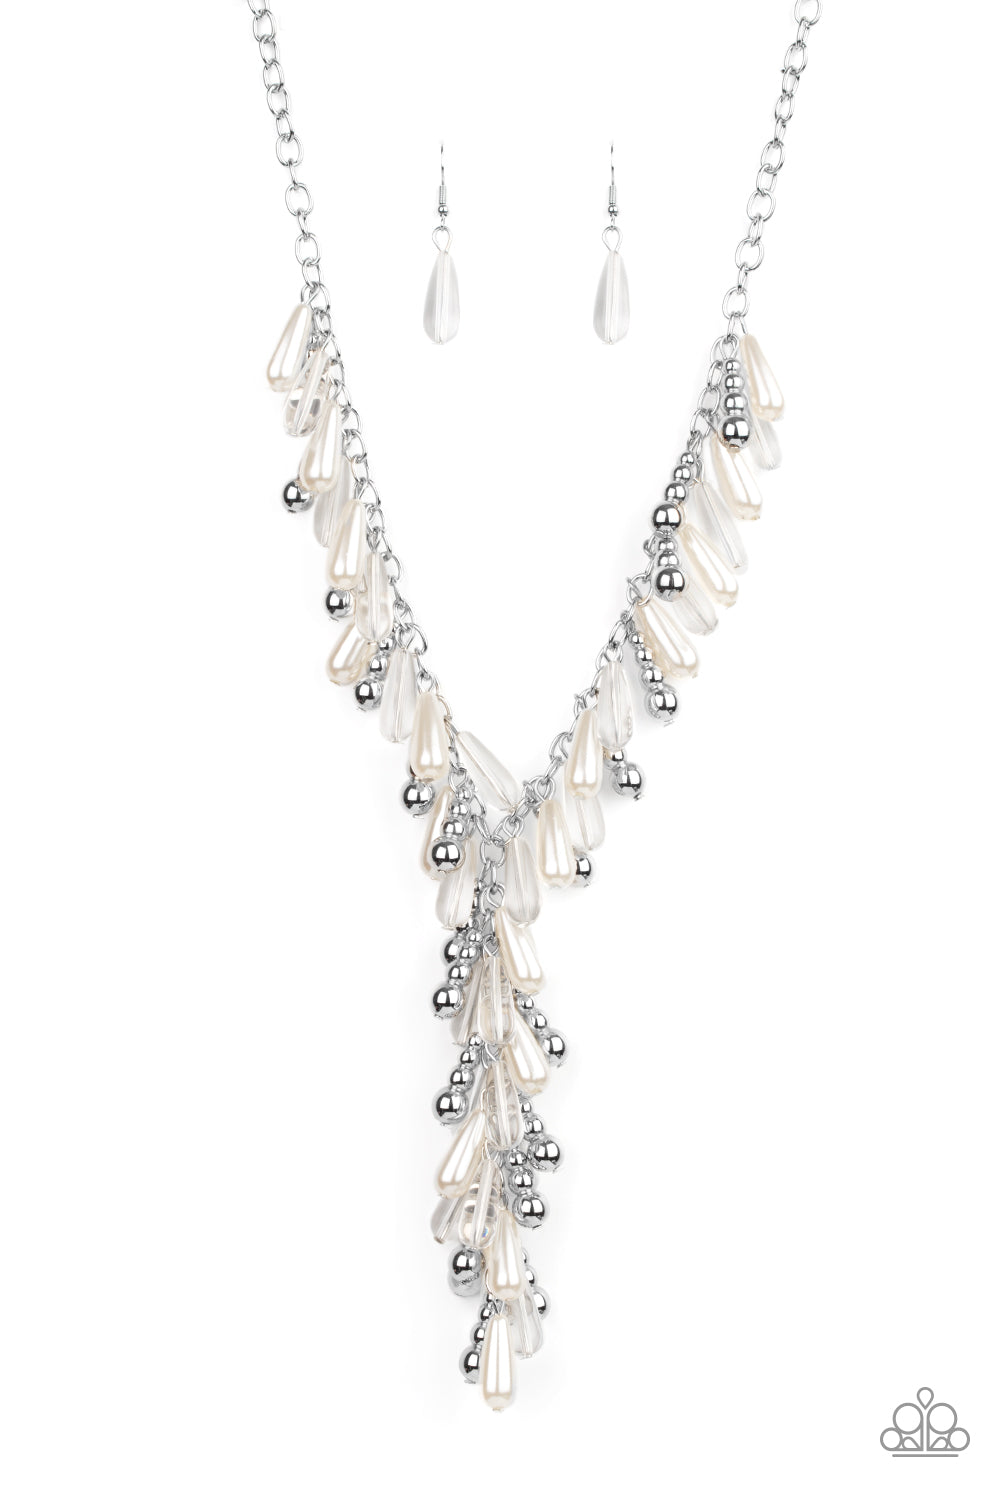 five-dollar-jewelry-dripping-with-diva-ttitude-white-paparazzi-accessories